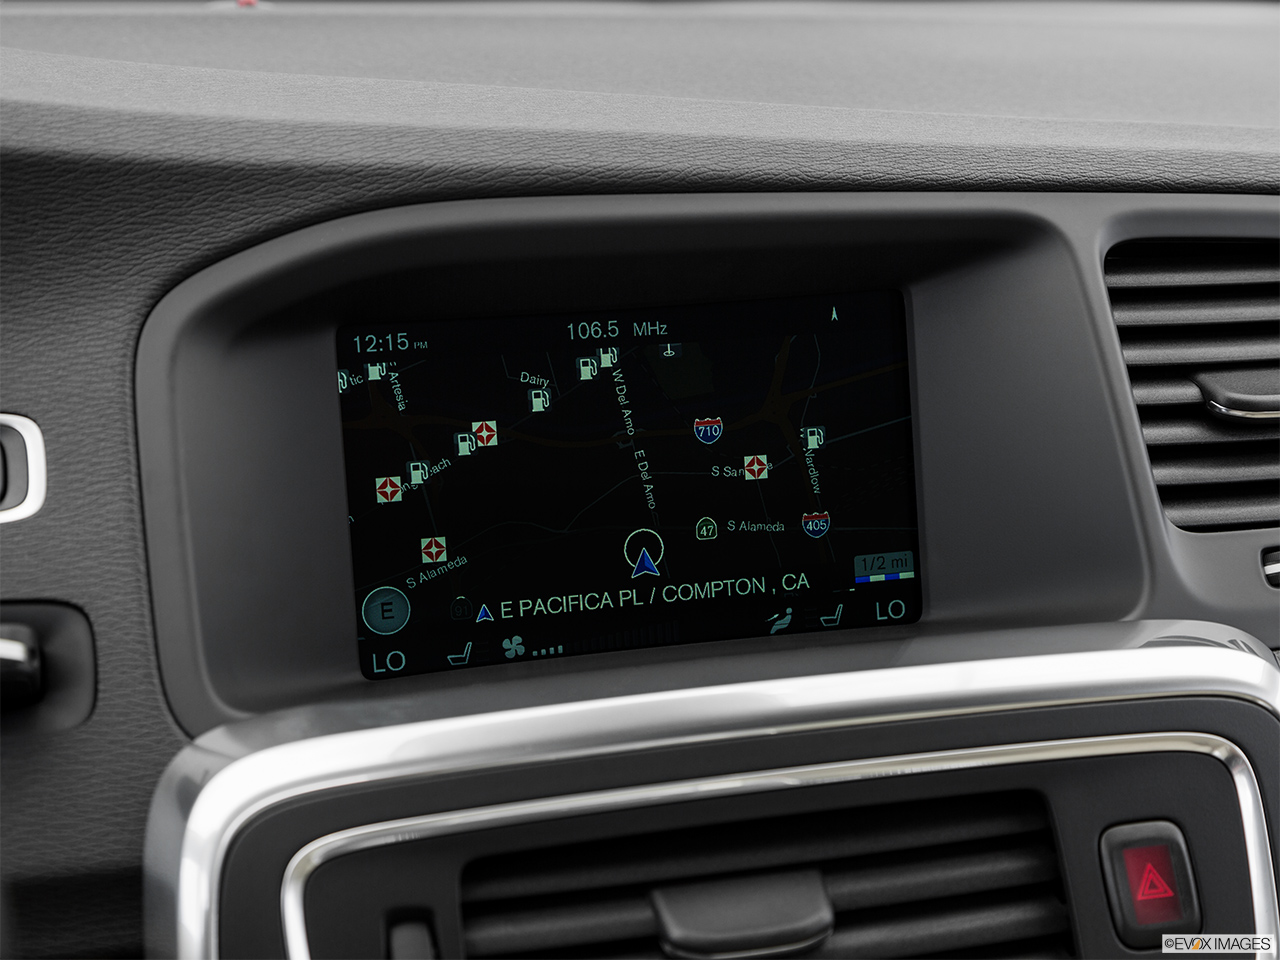 2016 Volvo S60 T5 Drive-E FWD Premier Driver position view of navigation system. 